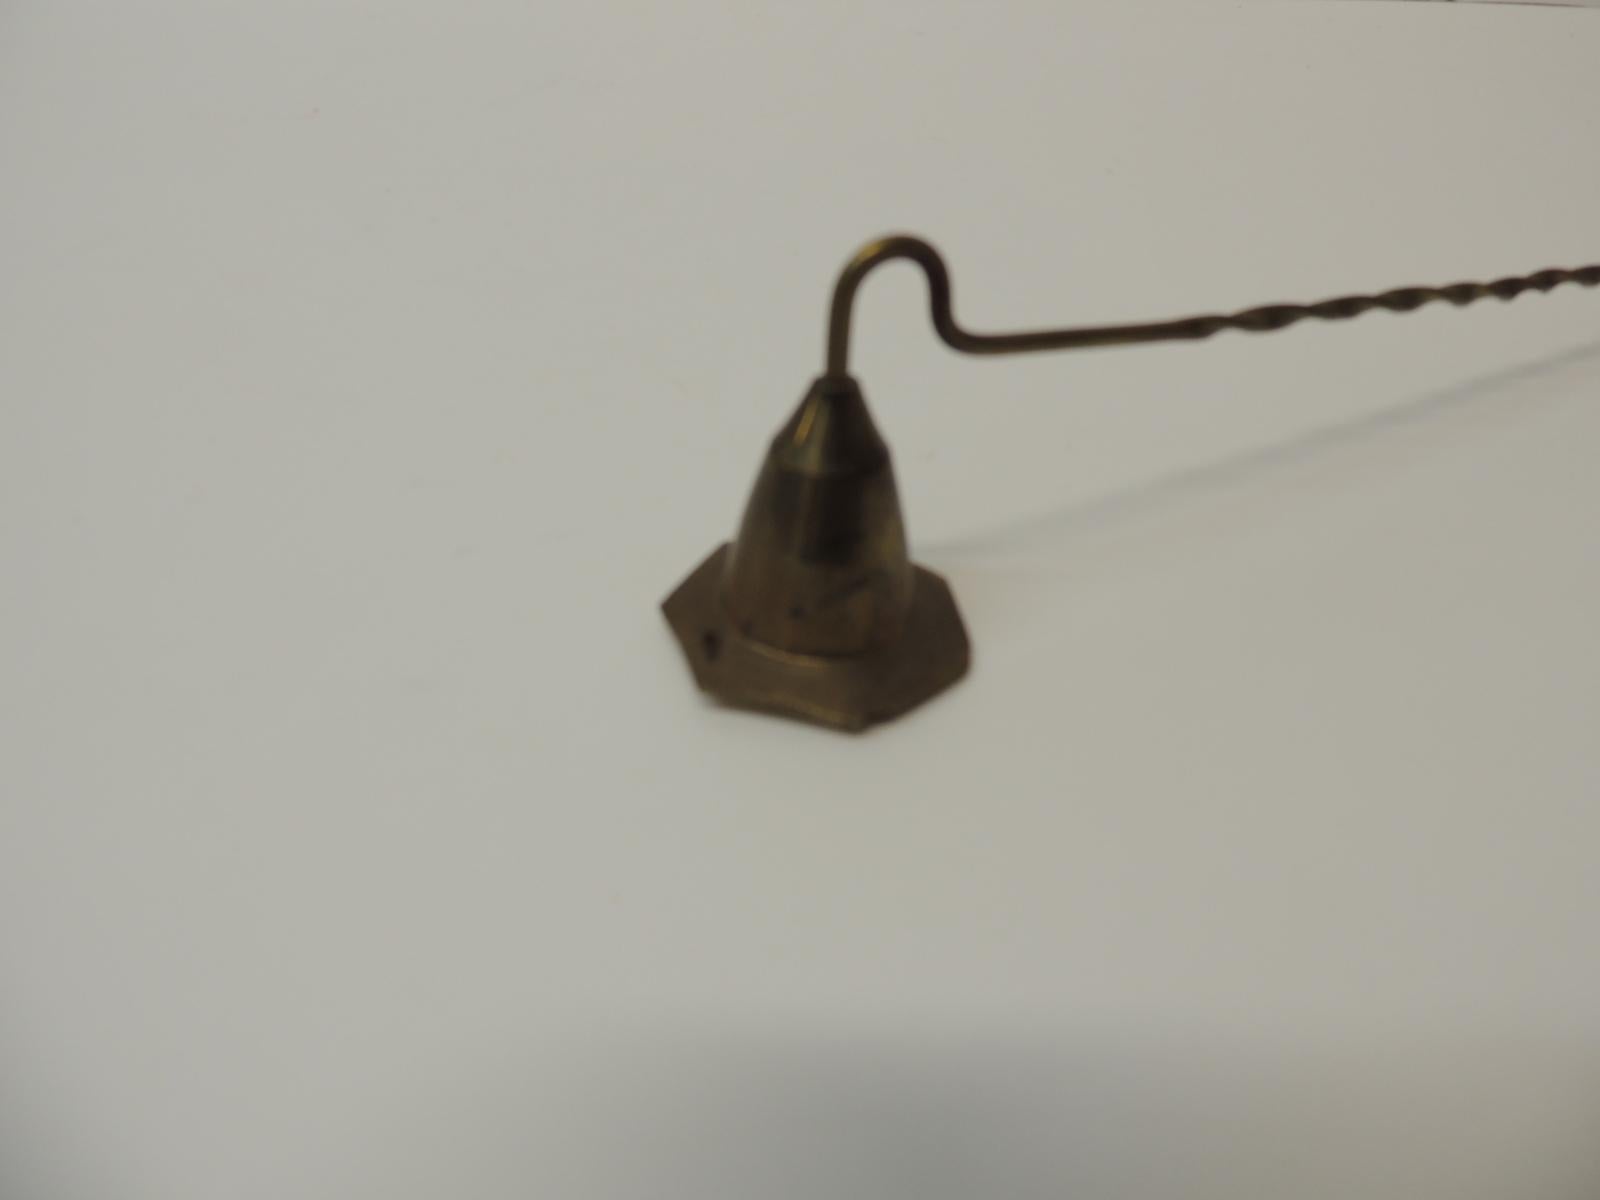 Vintage brass trumpet shape candle snuffer
With twisted handle shape.
Size: 10.5